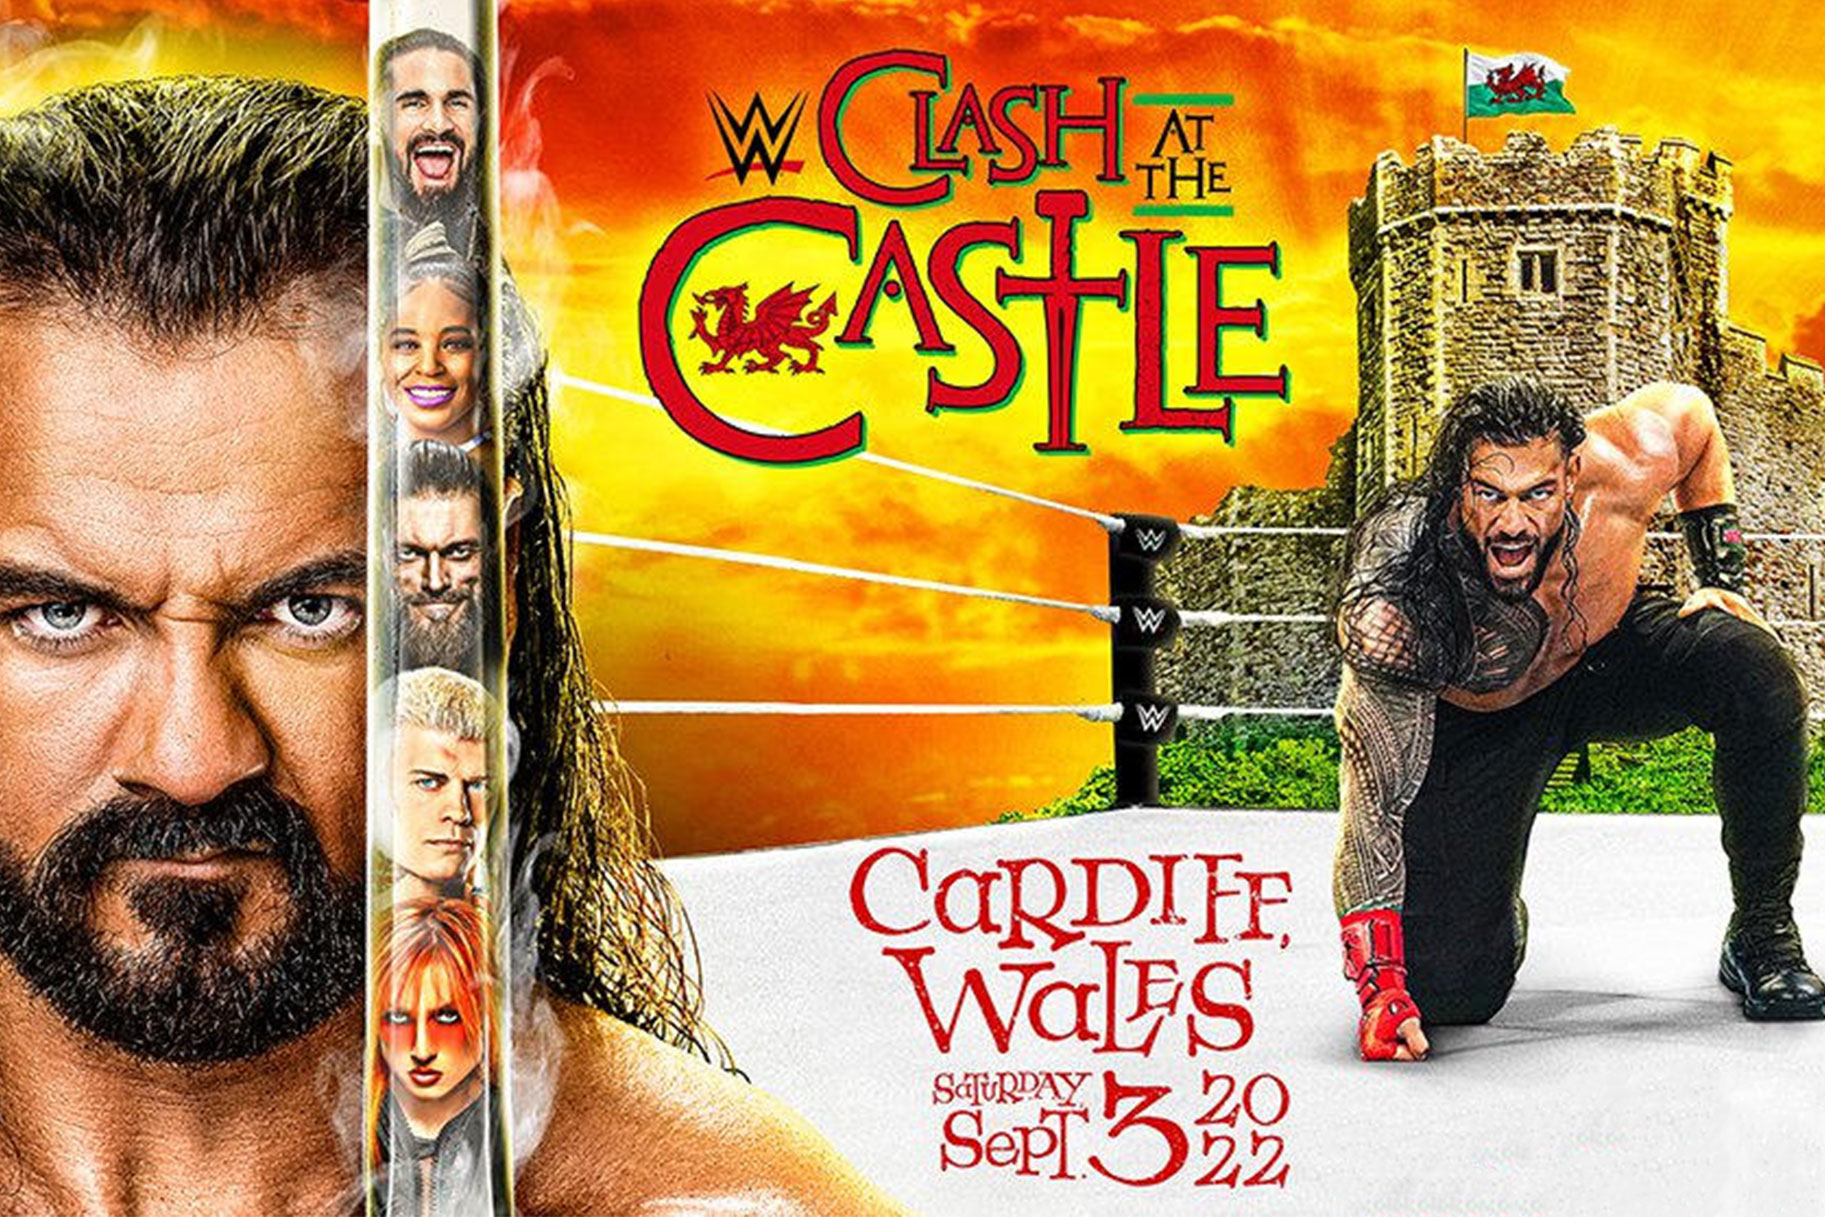 Key Art for WWE's Clash At The Castle